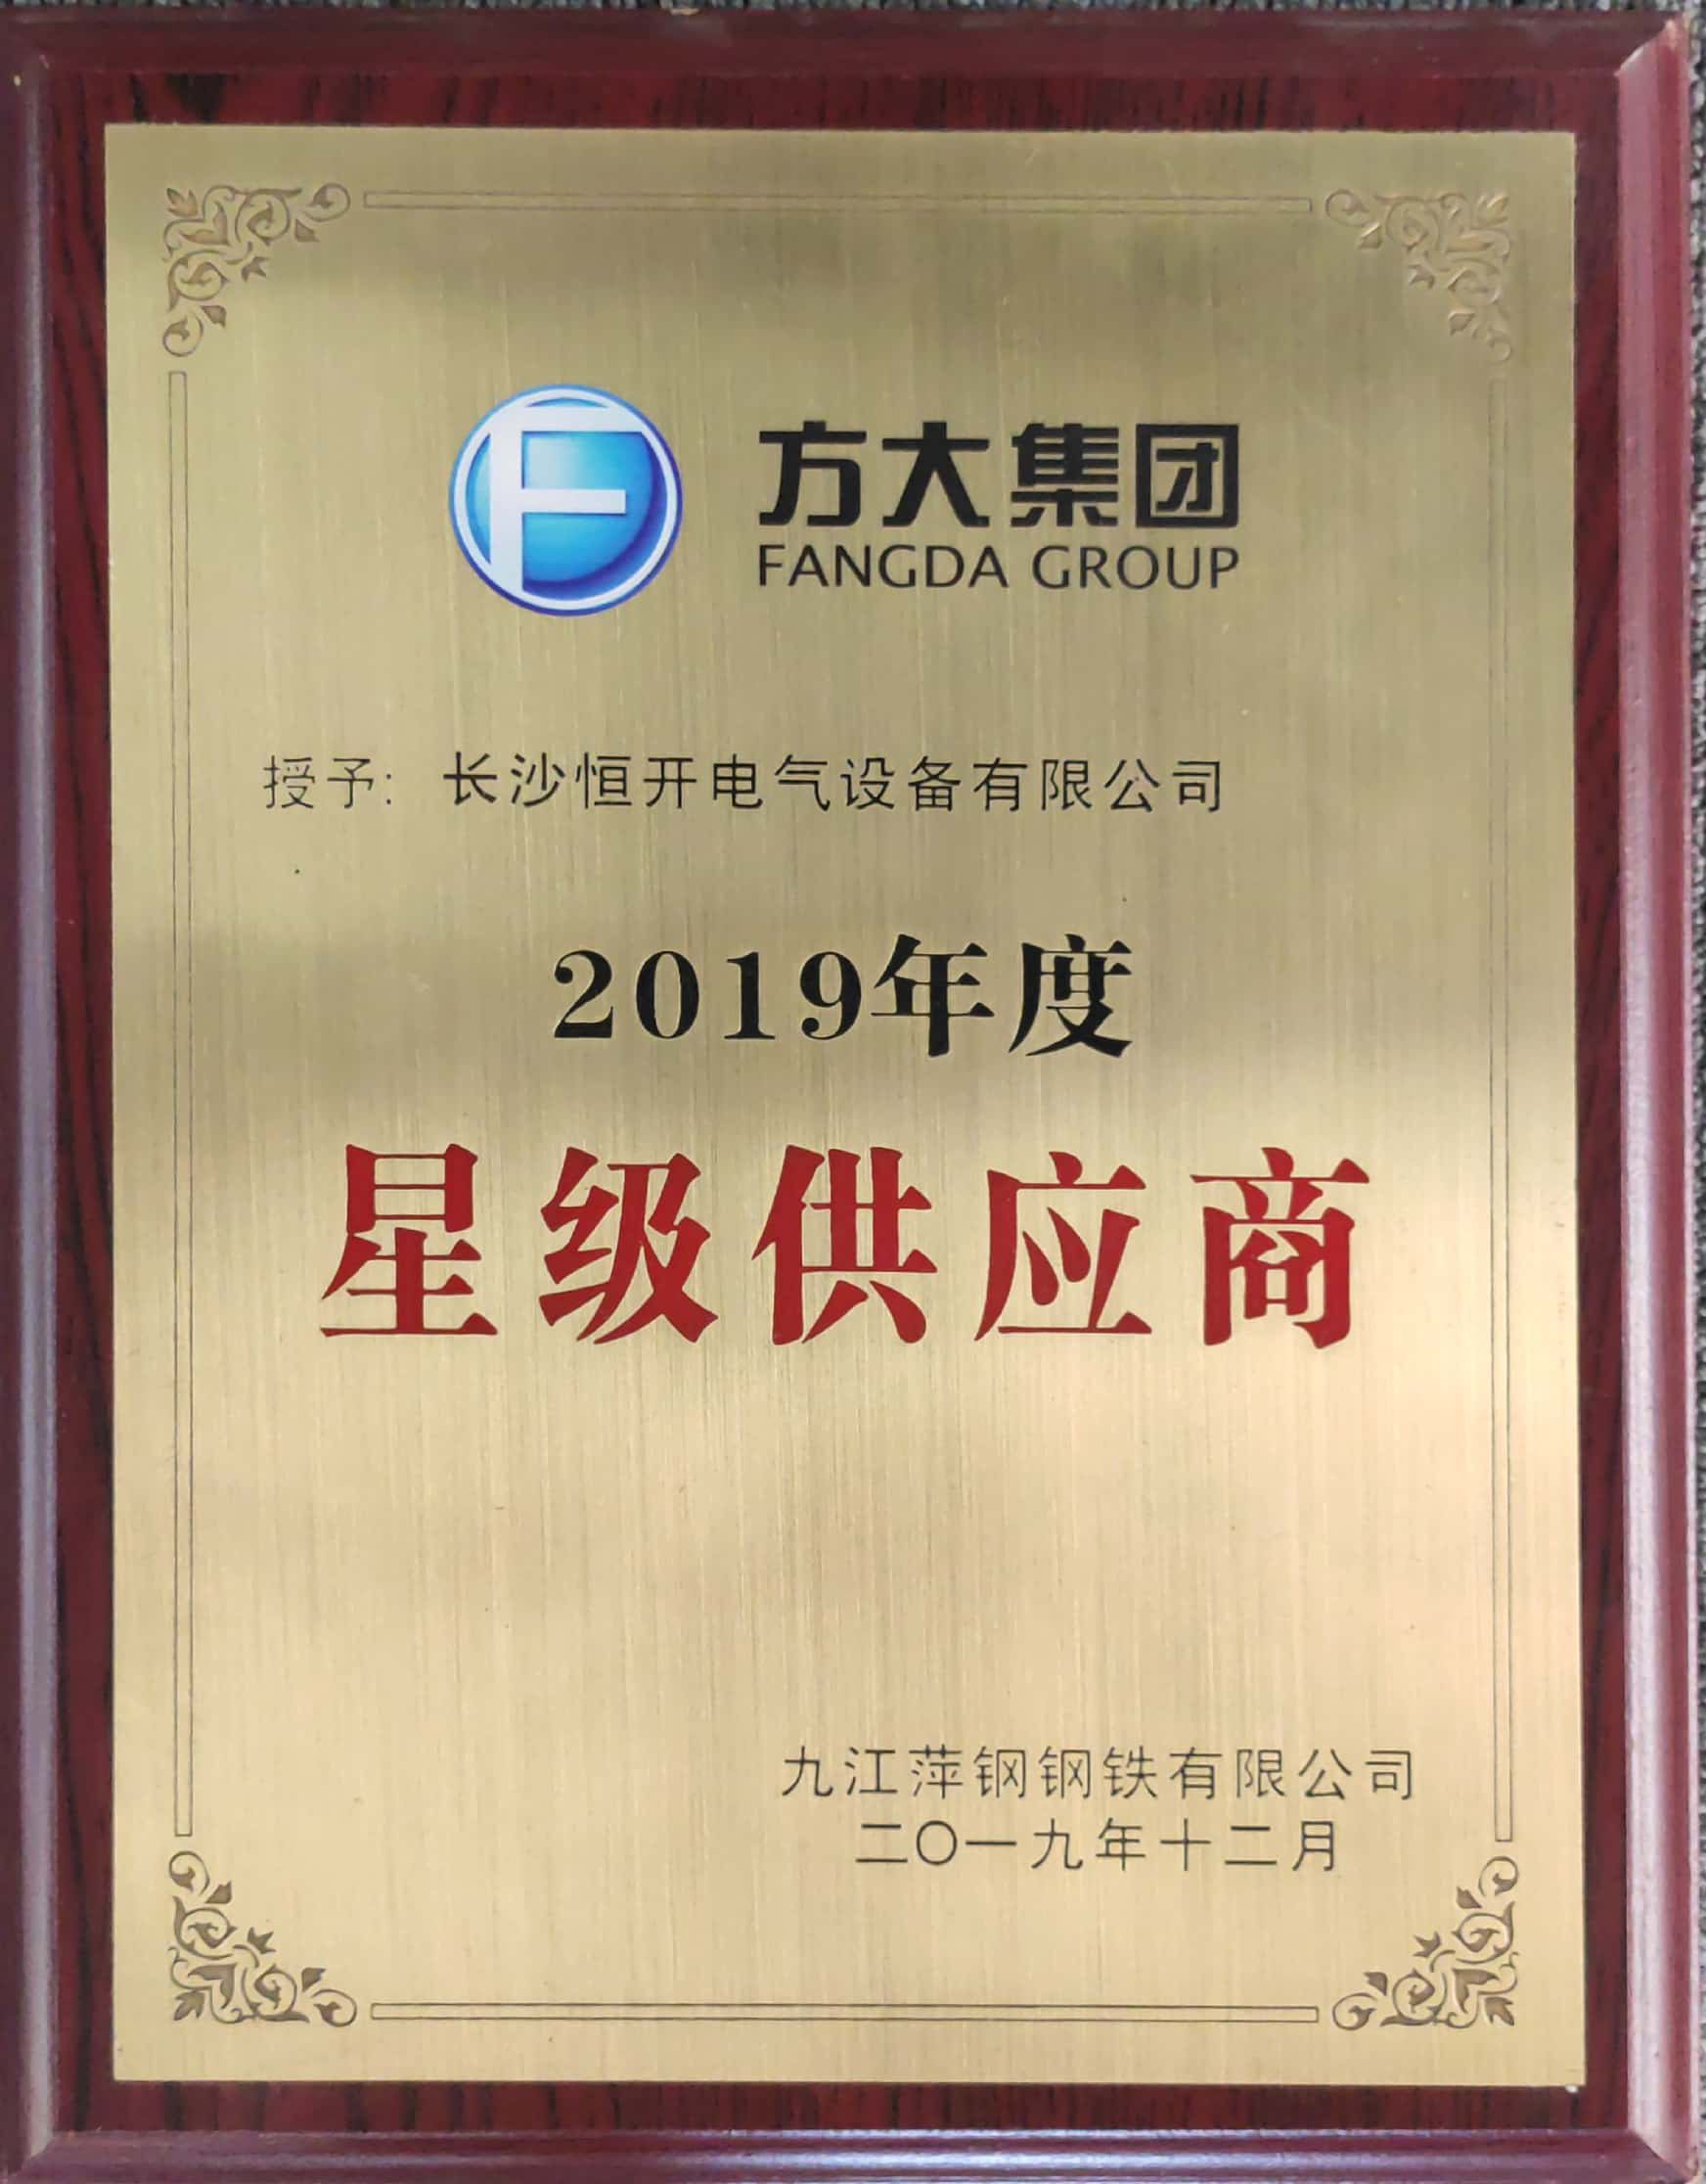 Fangda Group: Star Supplier of the Year 2019